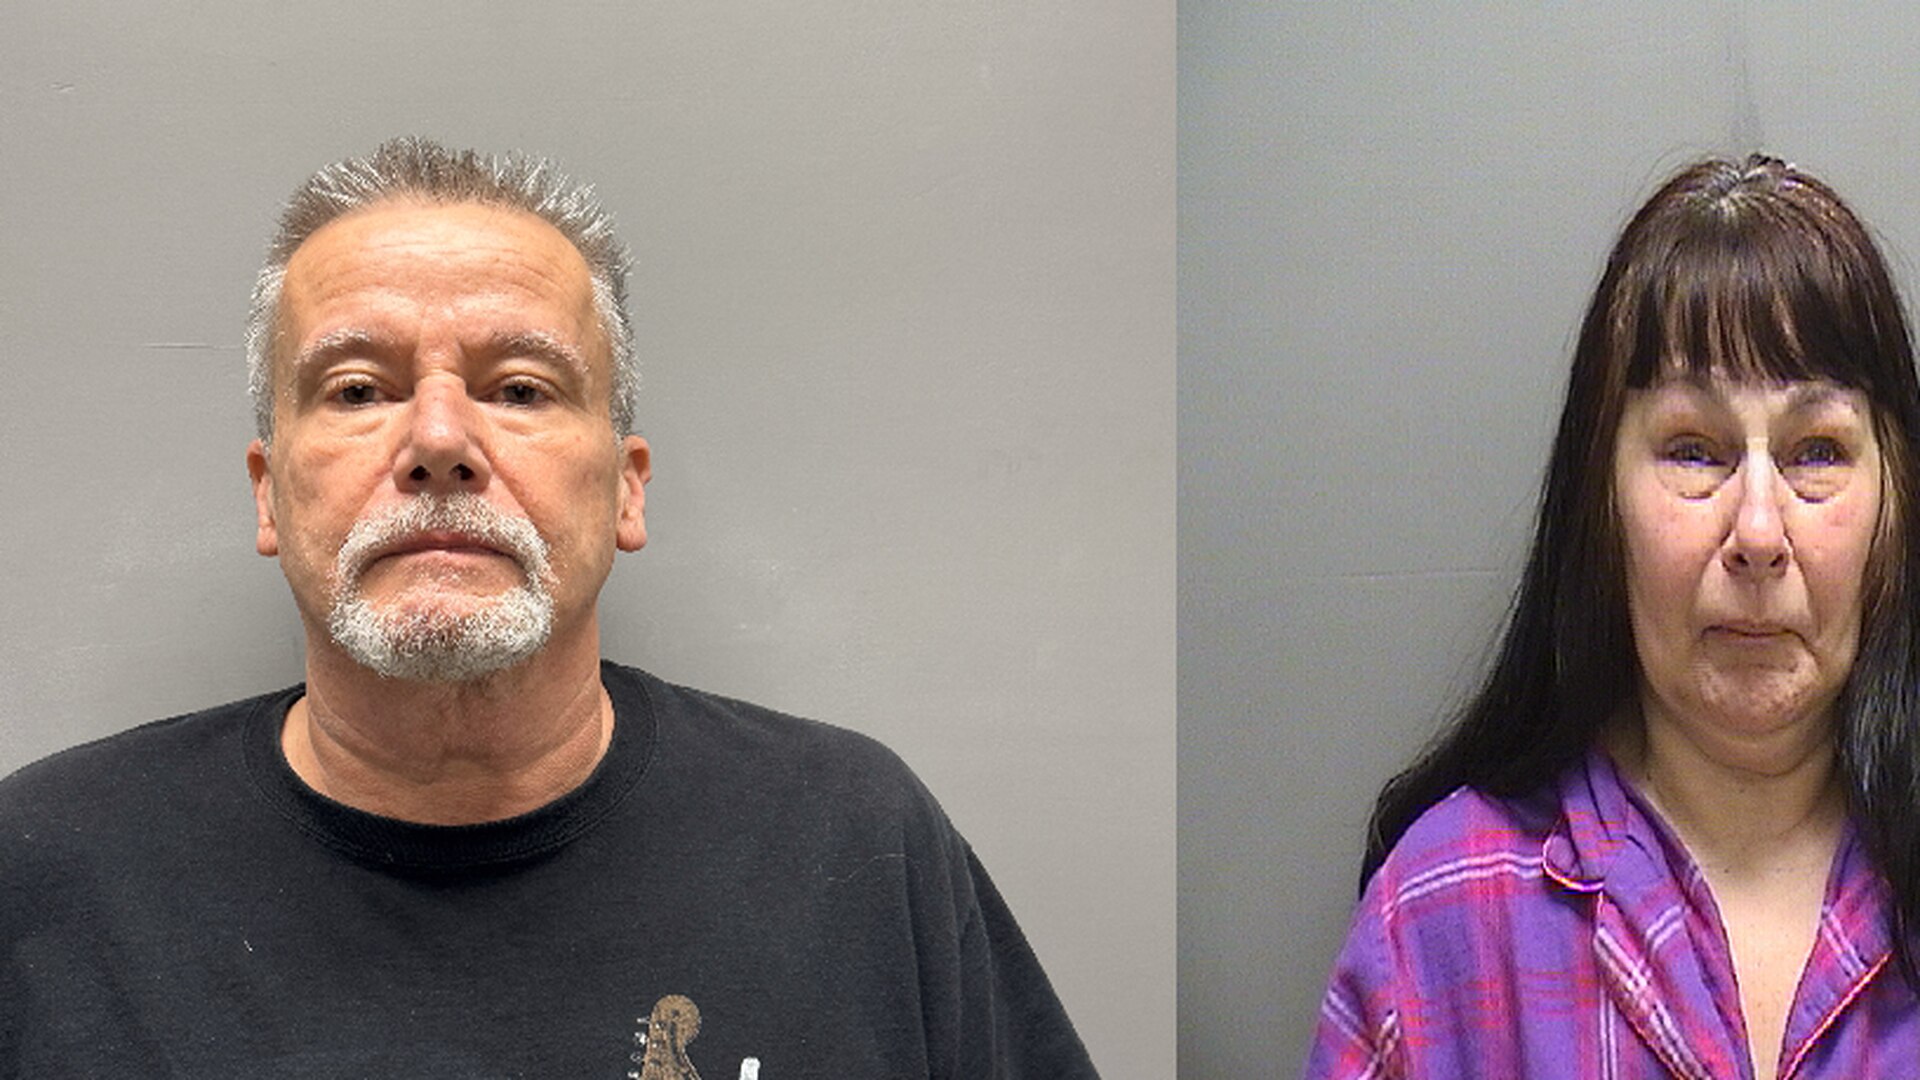 Connecticut Couple Faces Charges After Verbally Assaulting Landscapers With Xenophobic Comments